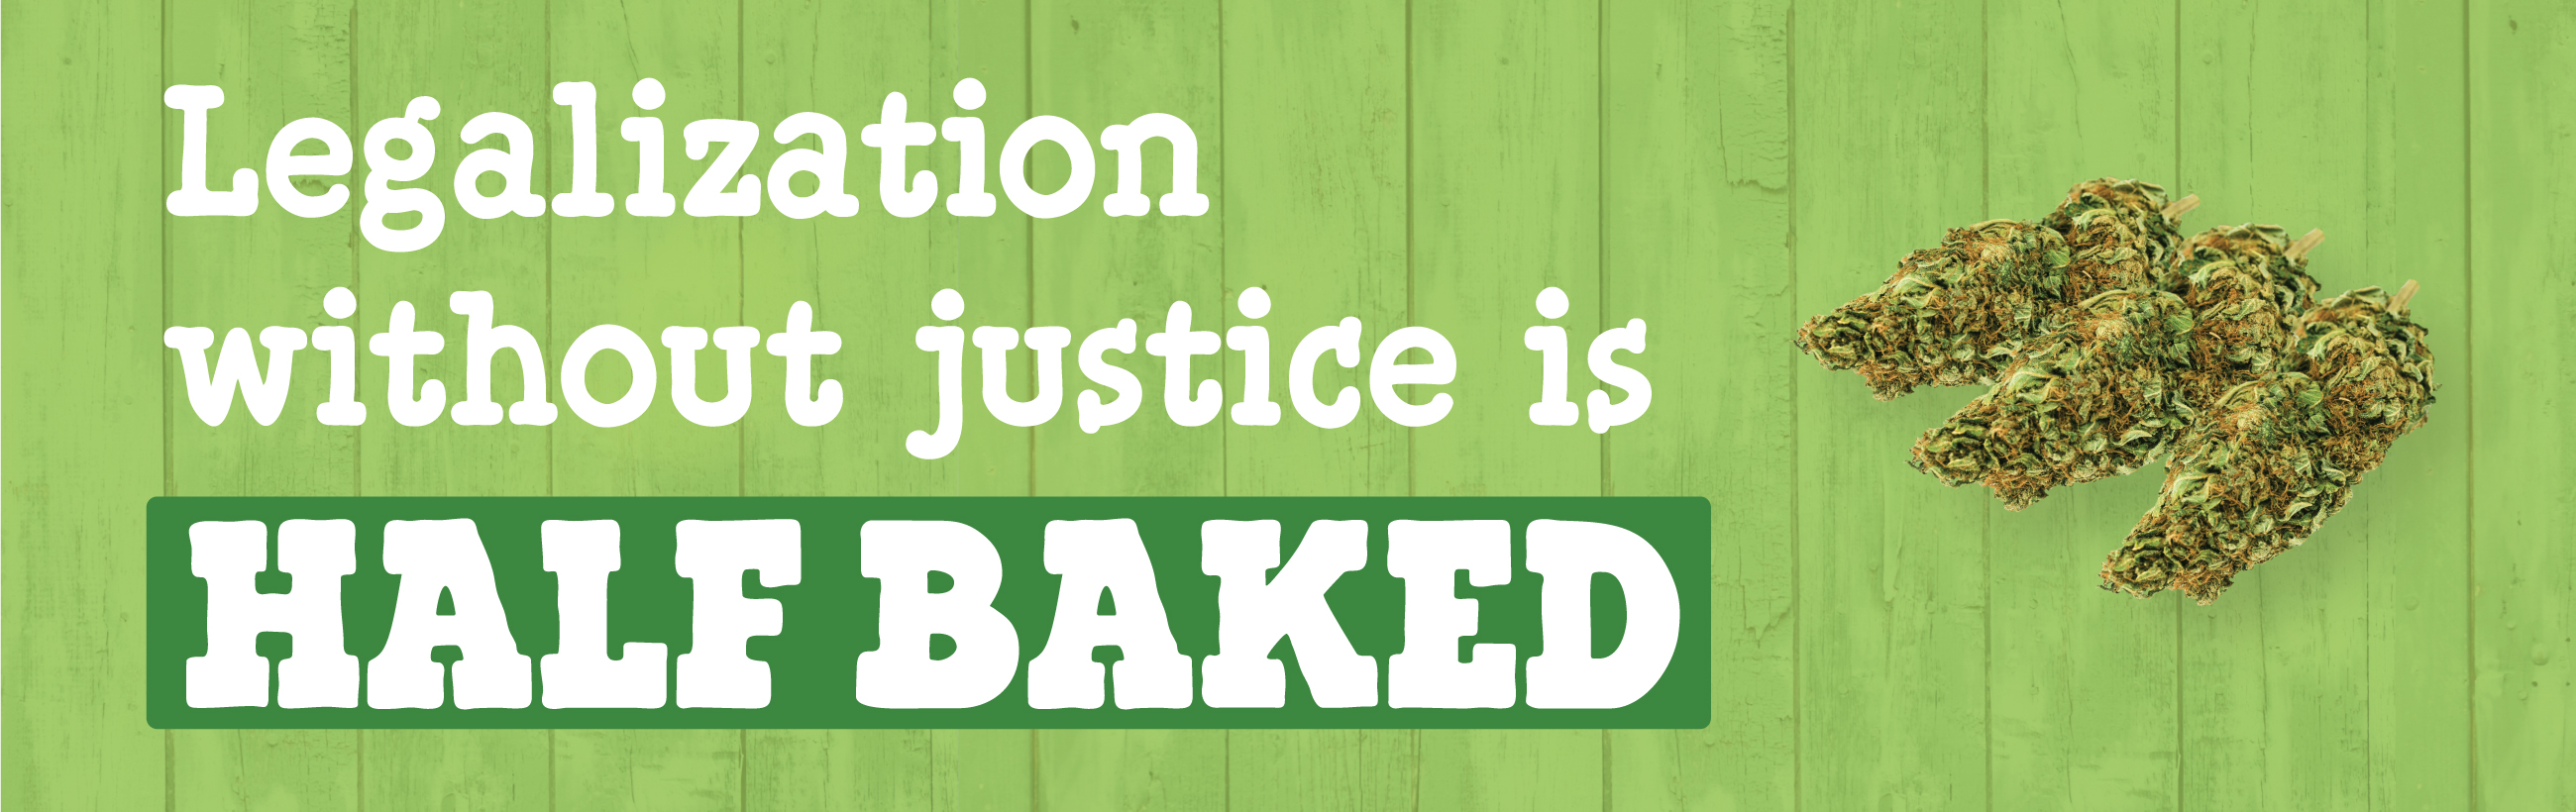 Legalization without justice is Half Baked banner